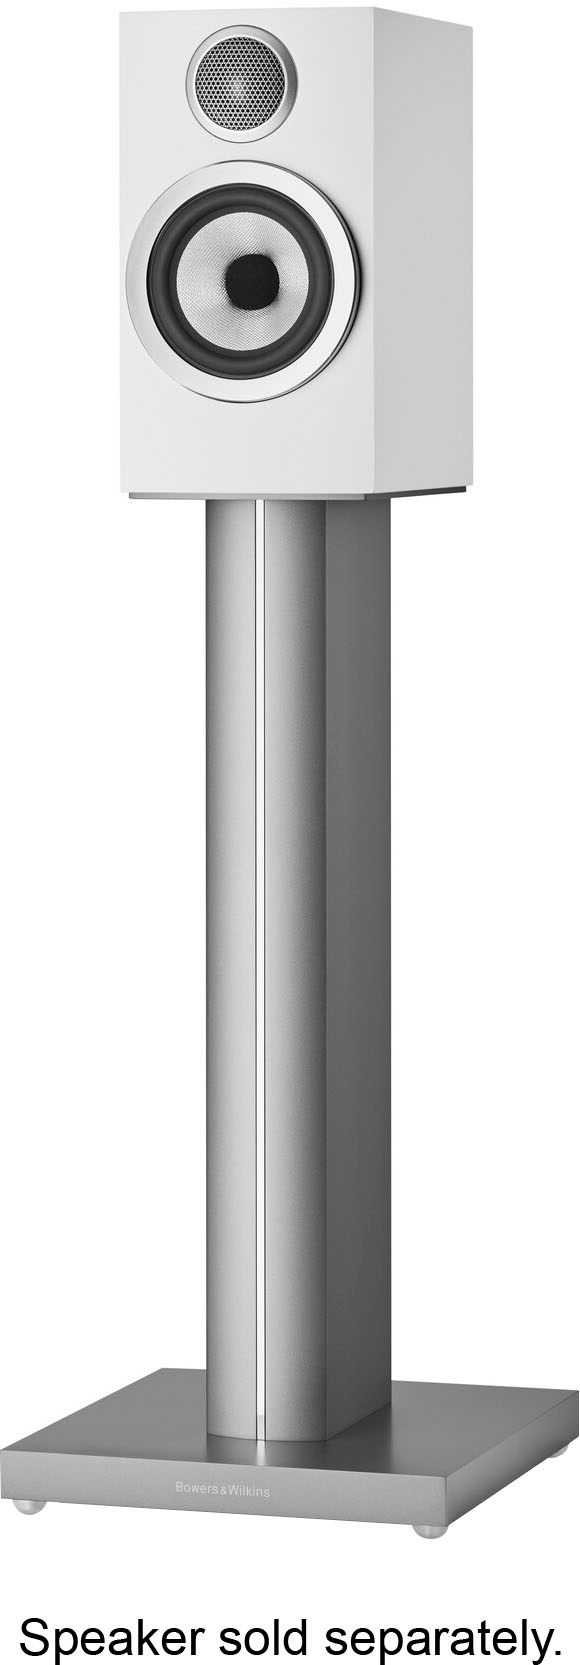 Left View: Bowers & Wilkins - FS-700 S3 Speaker Stands - Triple-Column Design, Compatible with 700 S3 Bookshelf Speakers, Cable Management - Silver